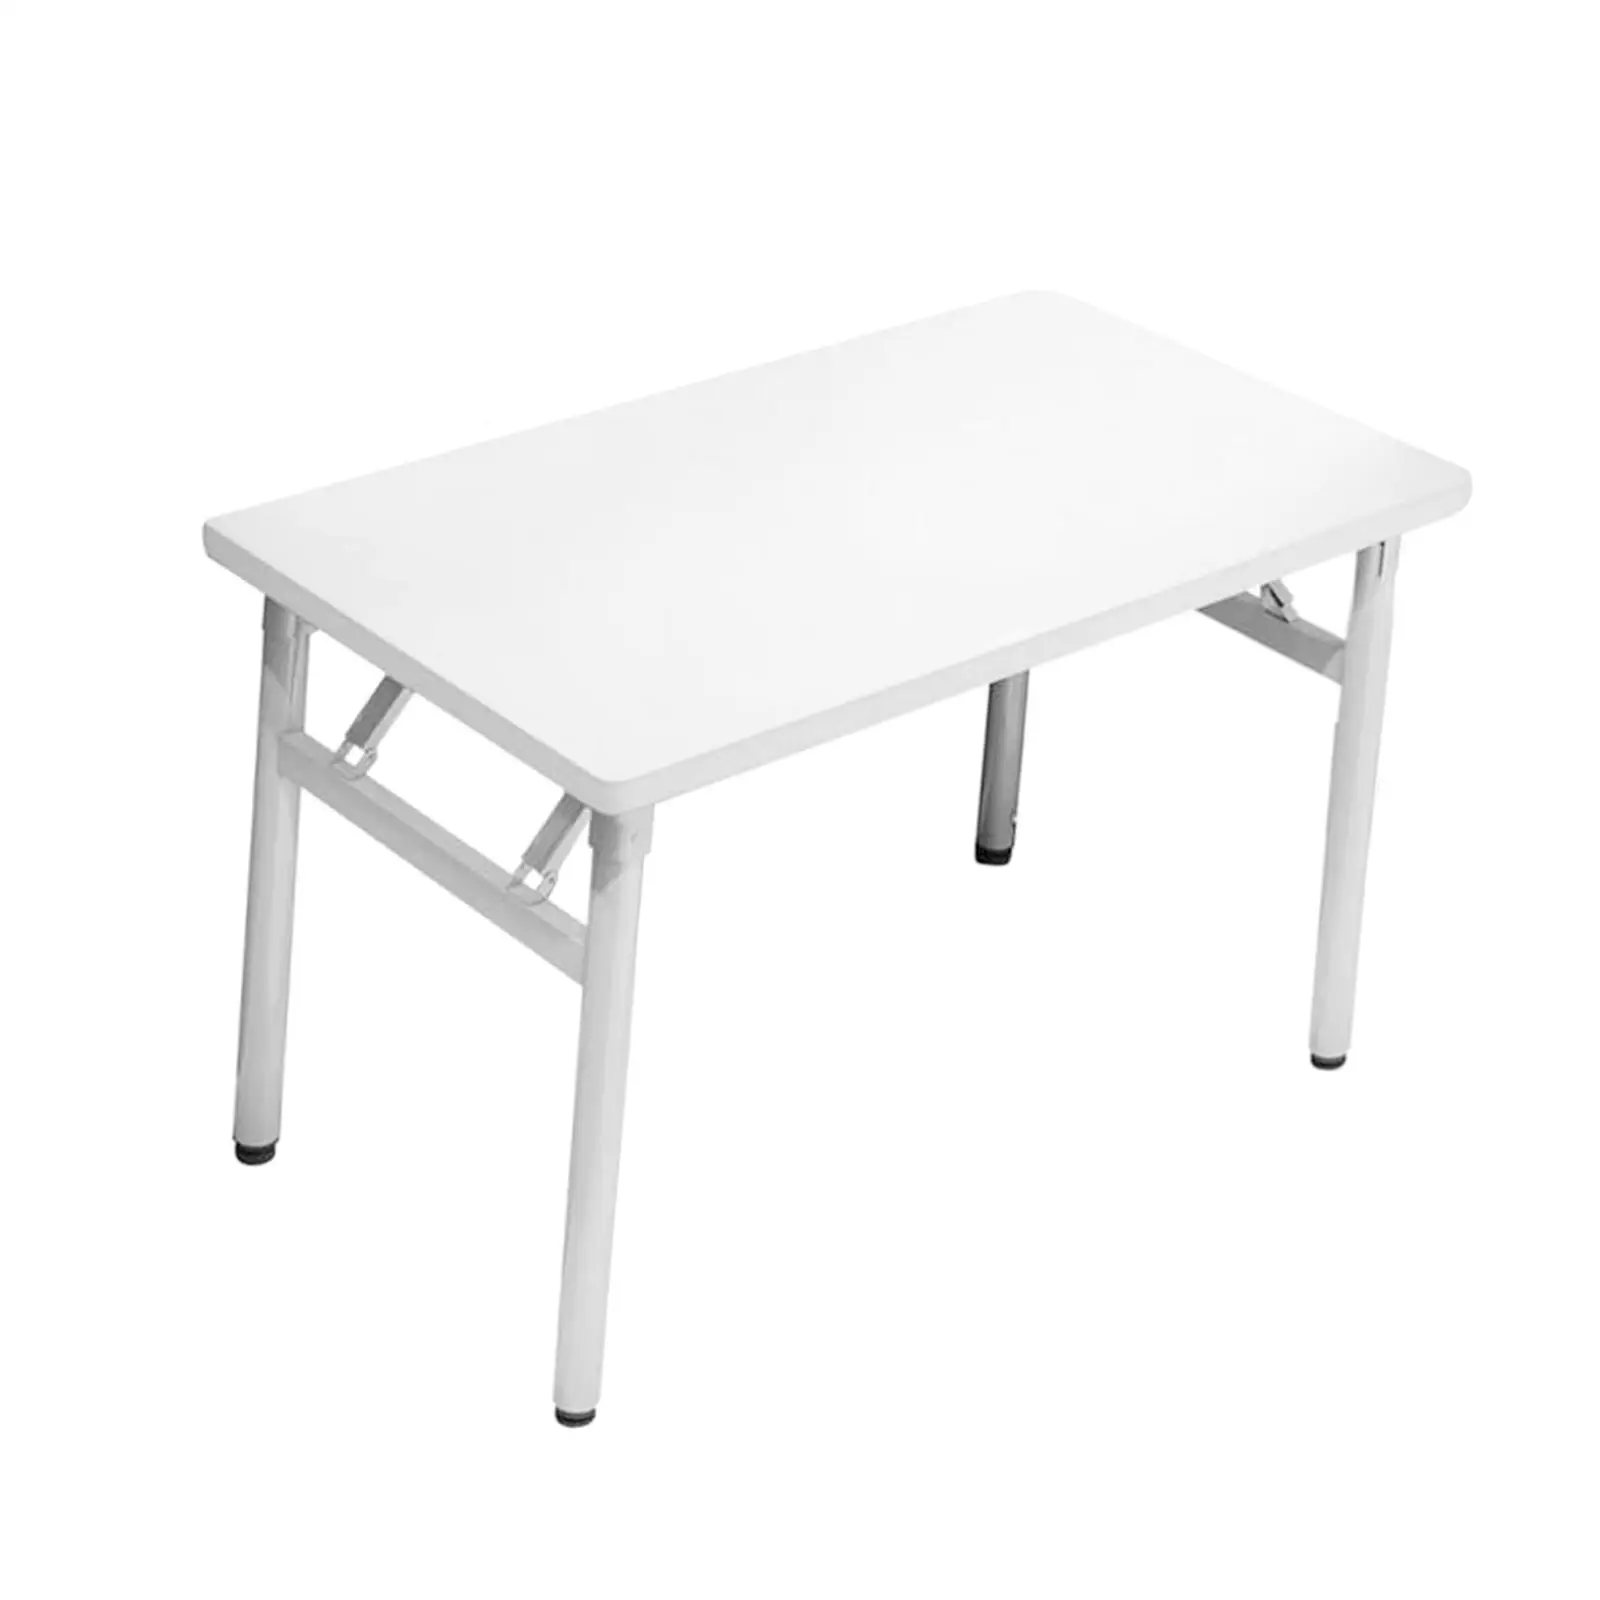 Heavy Duty Folding Table Study Table Laptop Tea Coffee Picnic Table Desk for Outdoor Party